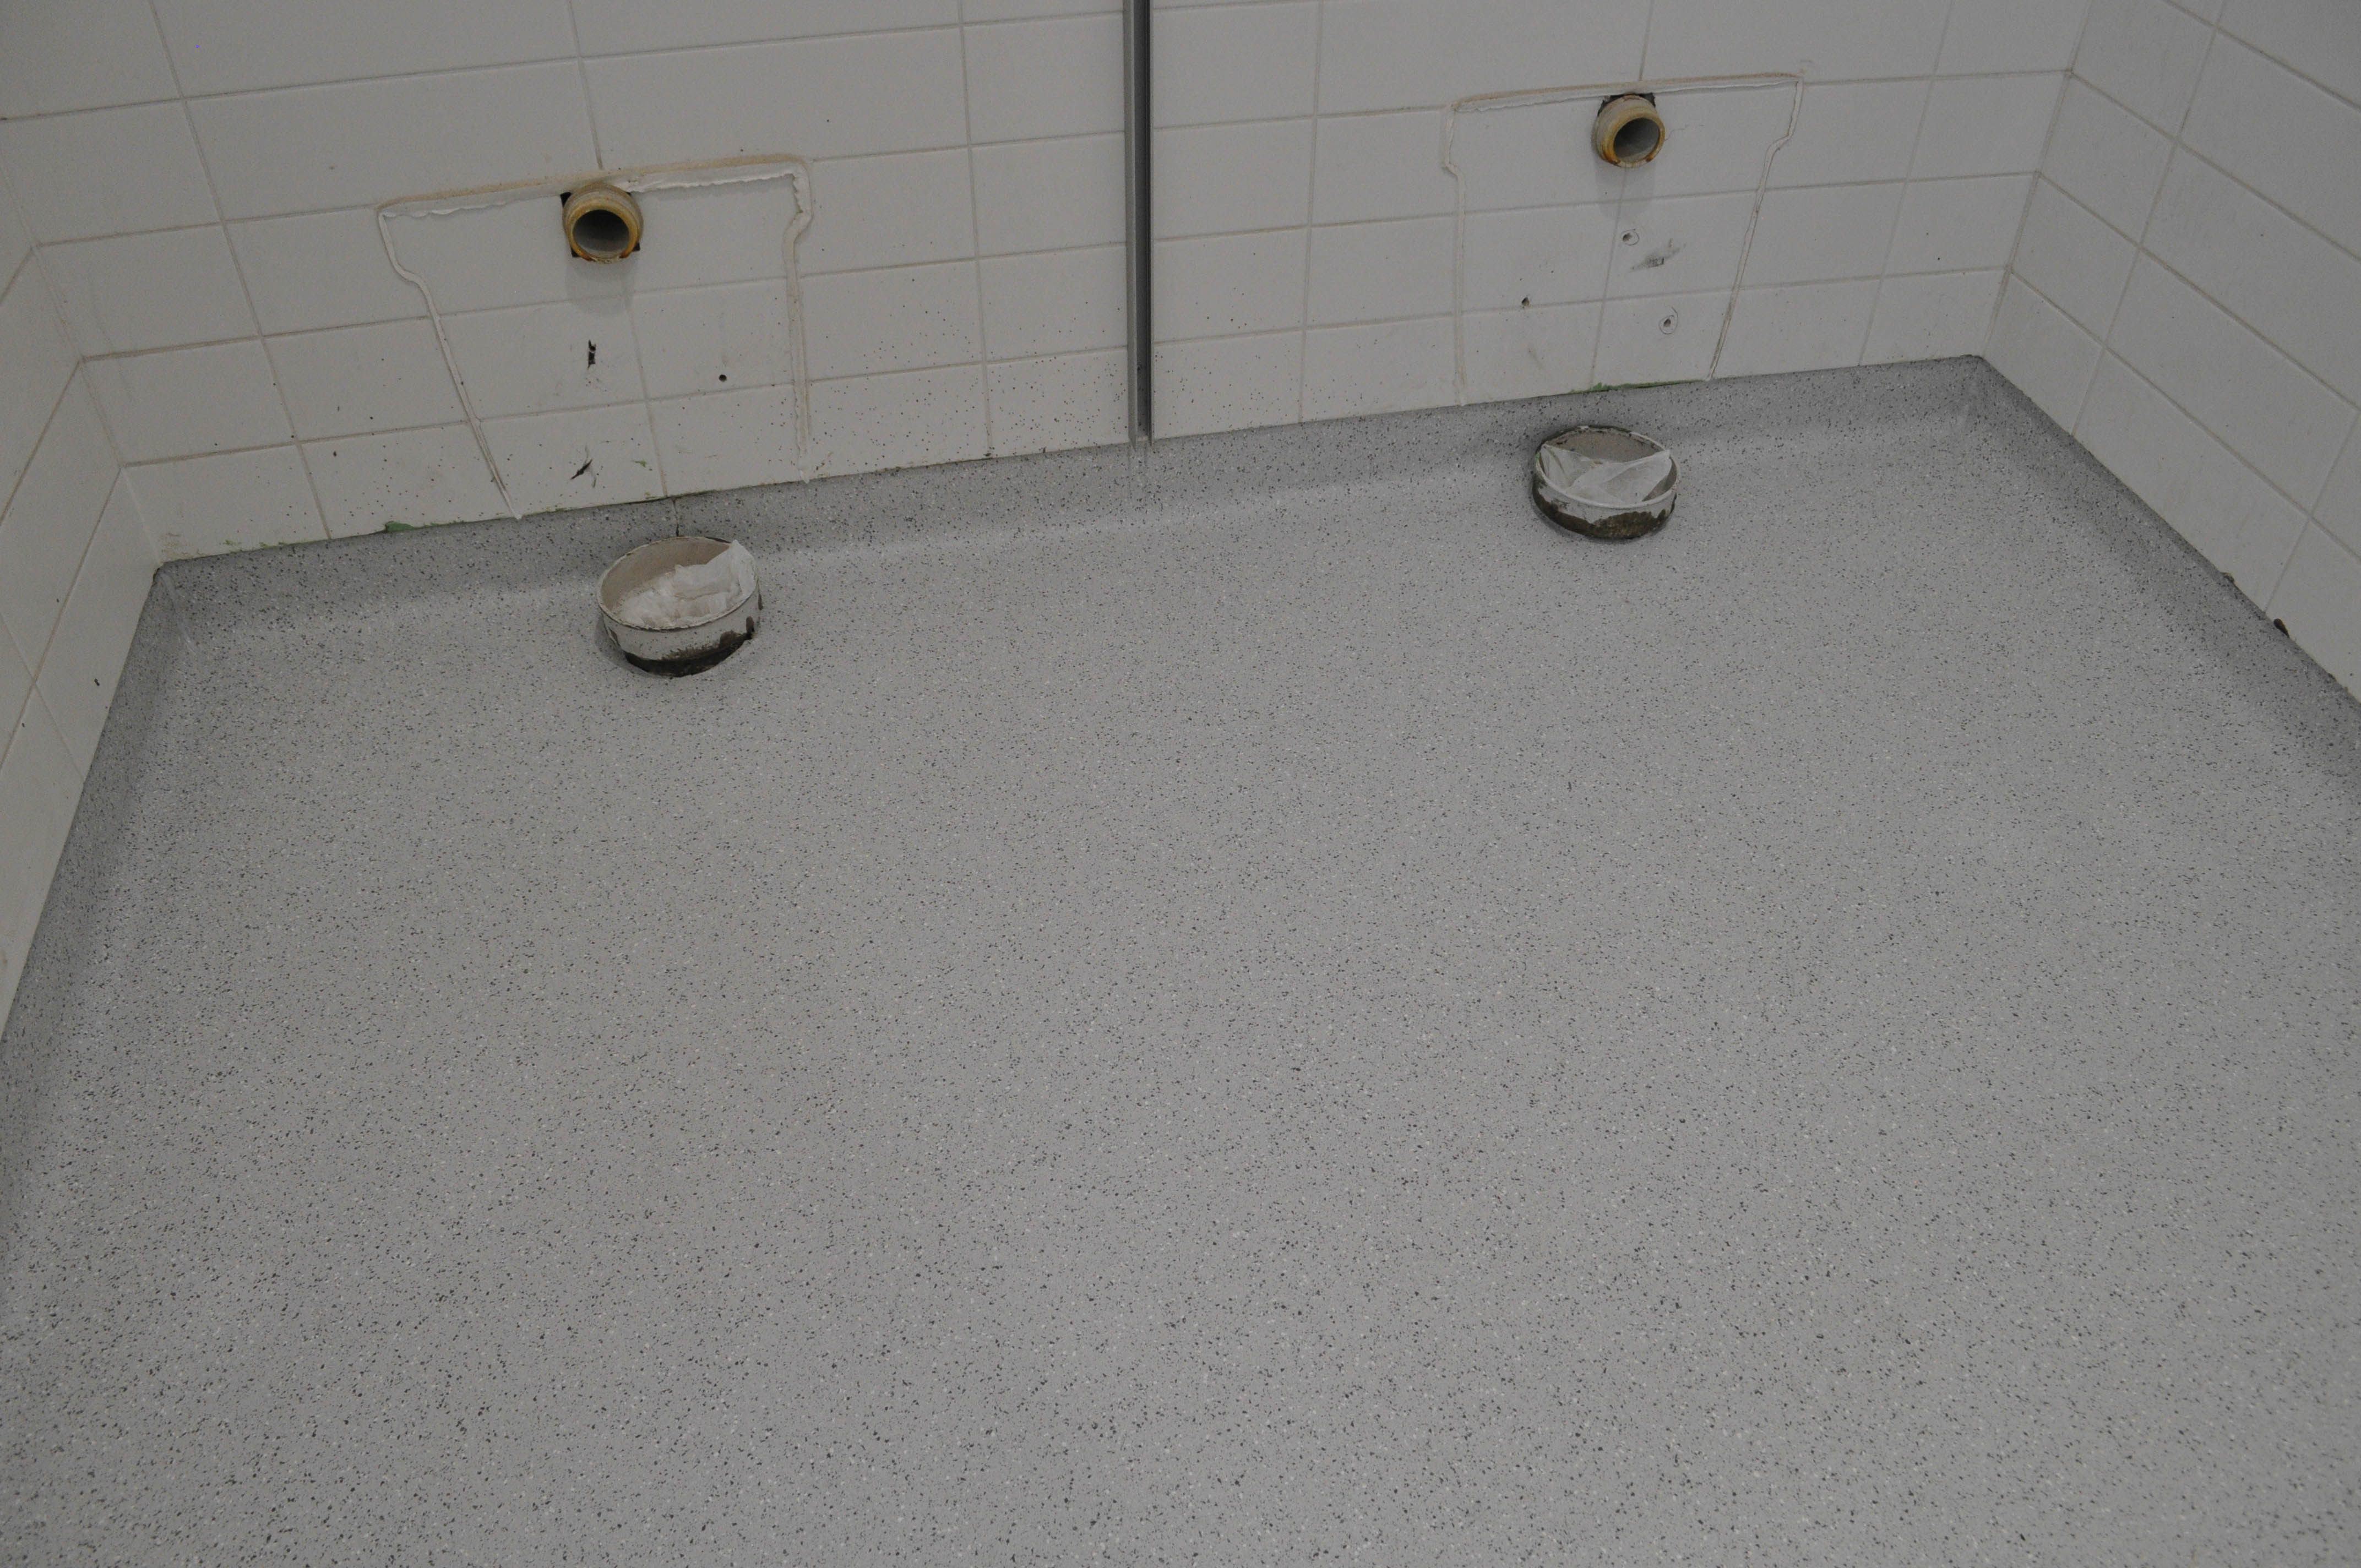 an empty room, a toilet, with exposed newly installed with vinyl coving 150mm up the wall. The vinyl surface is a light 
grey color. The walls are tiled with a white tile, that rise upwards.